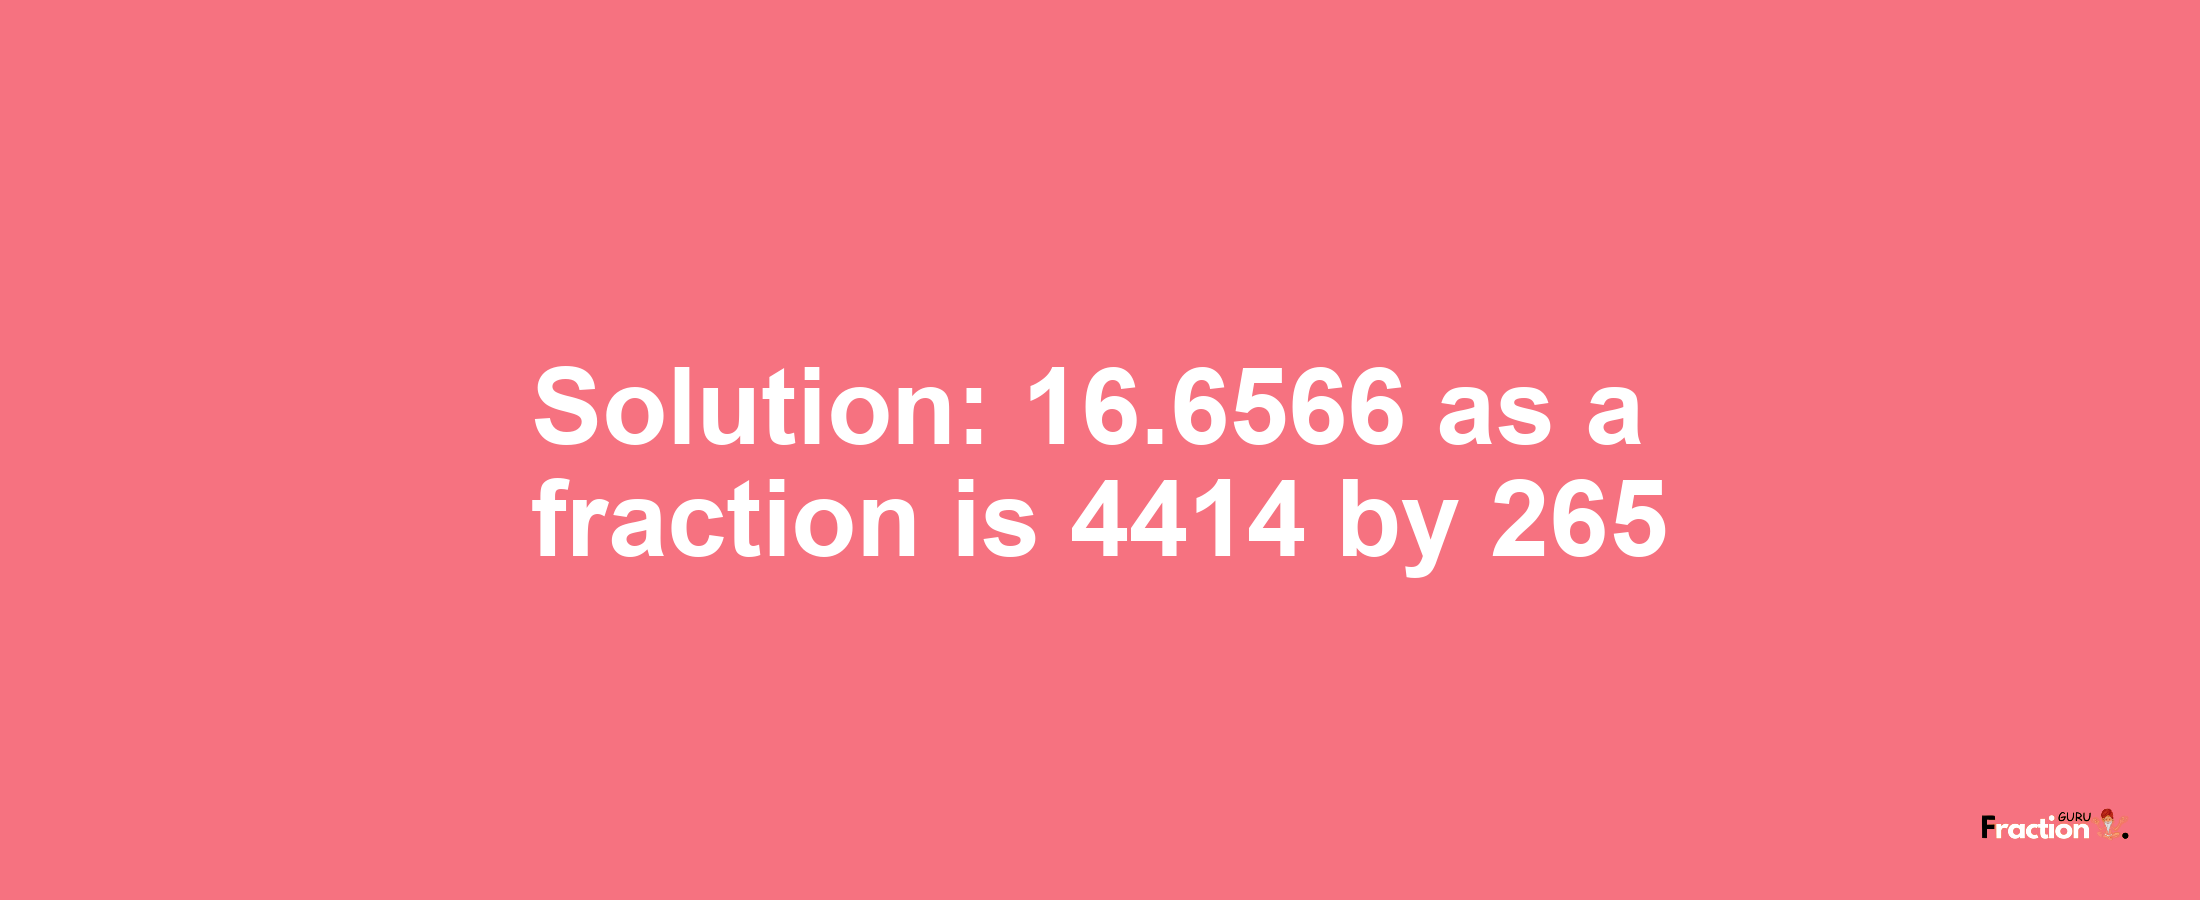 Solution:16.6566 as a fraction is 4414/265